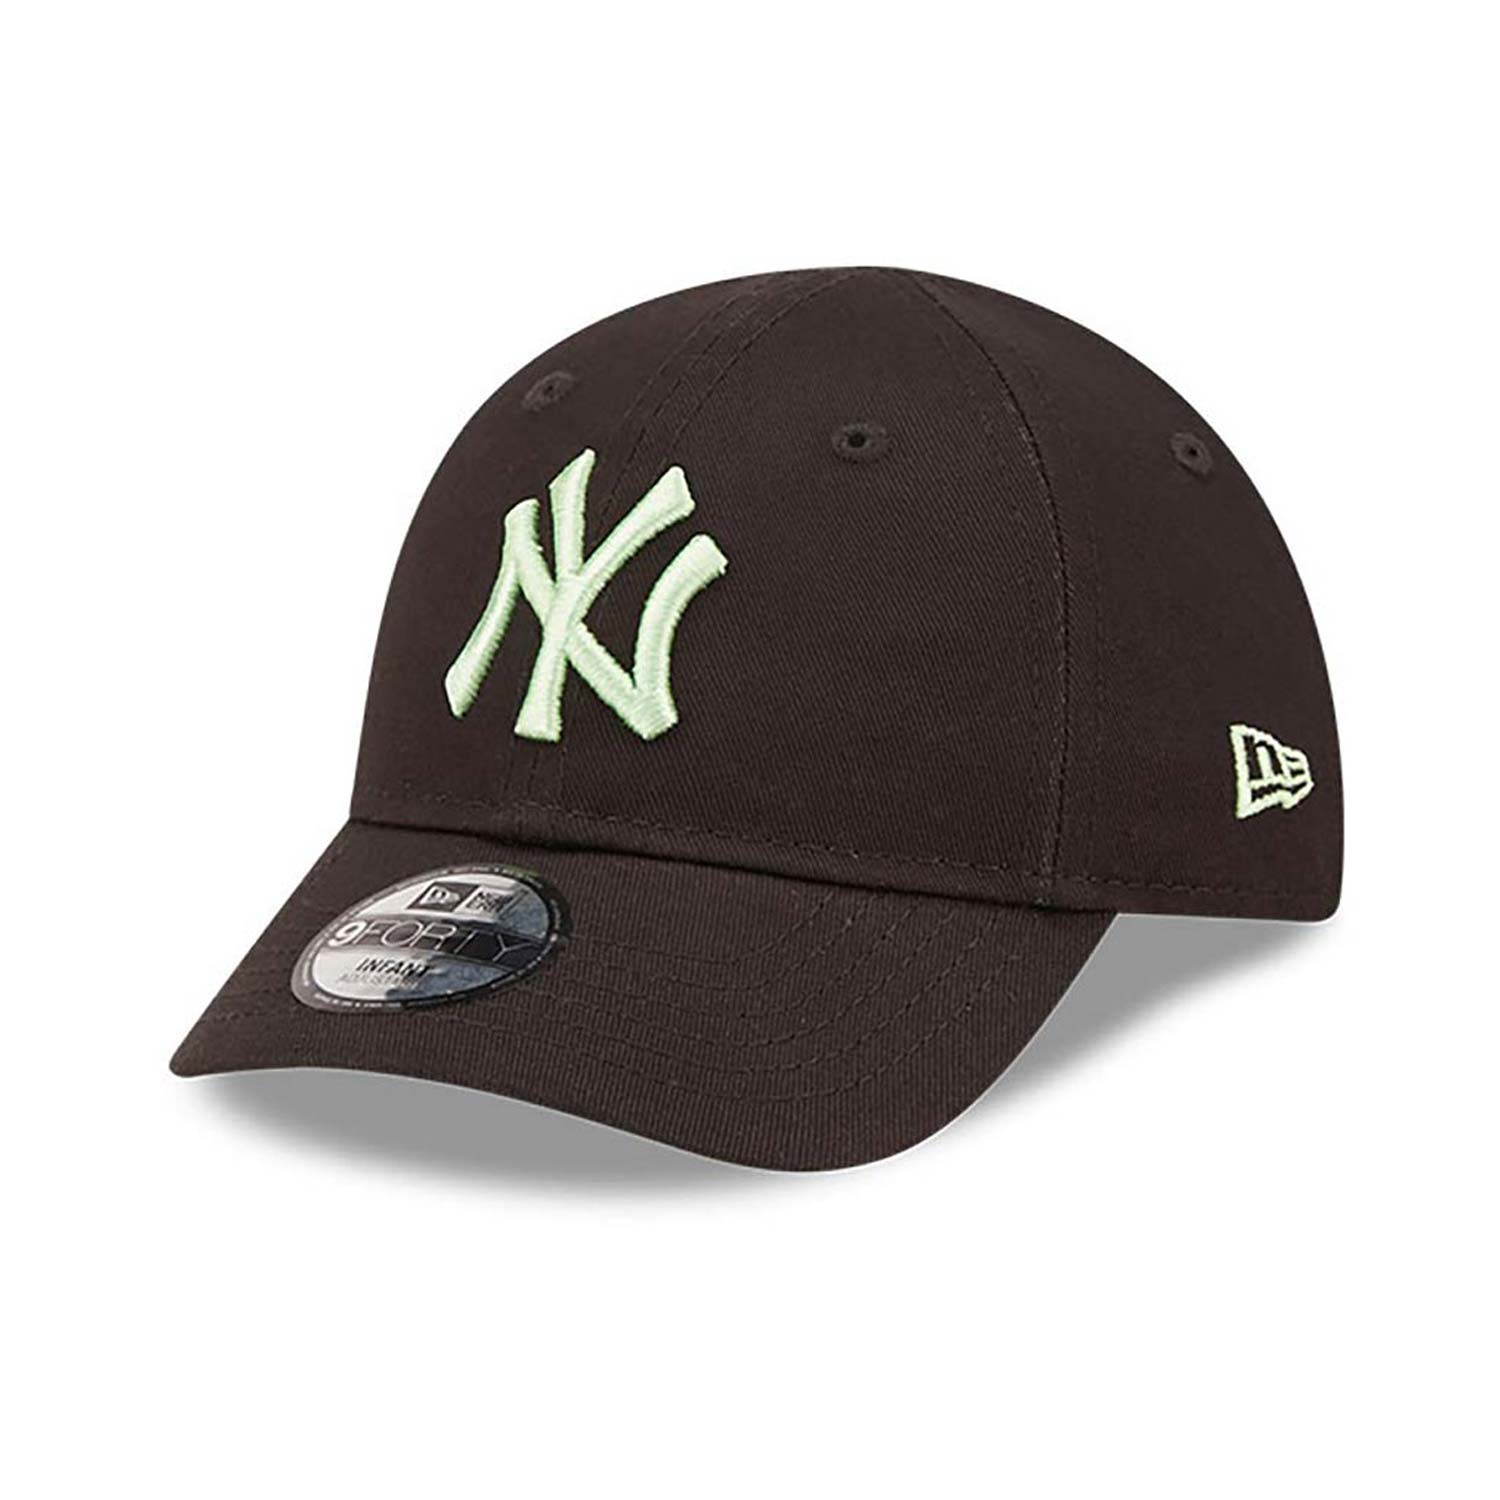 New York Yankees Infant League Essential Black 9FORTY Cap